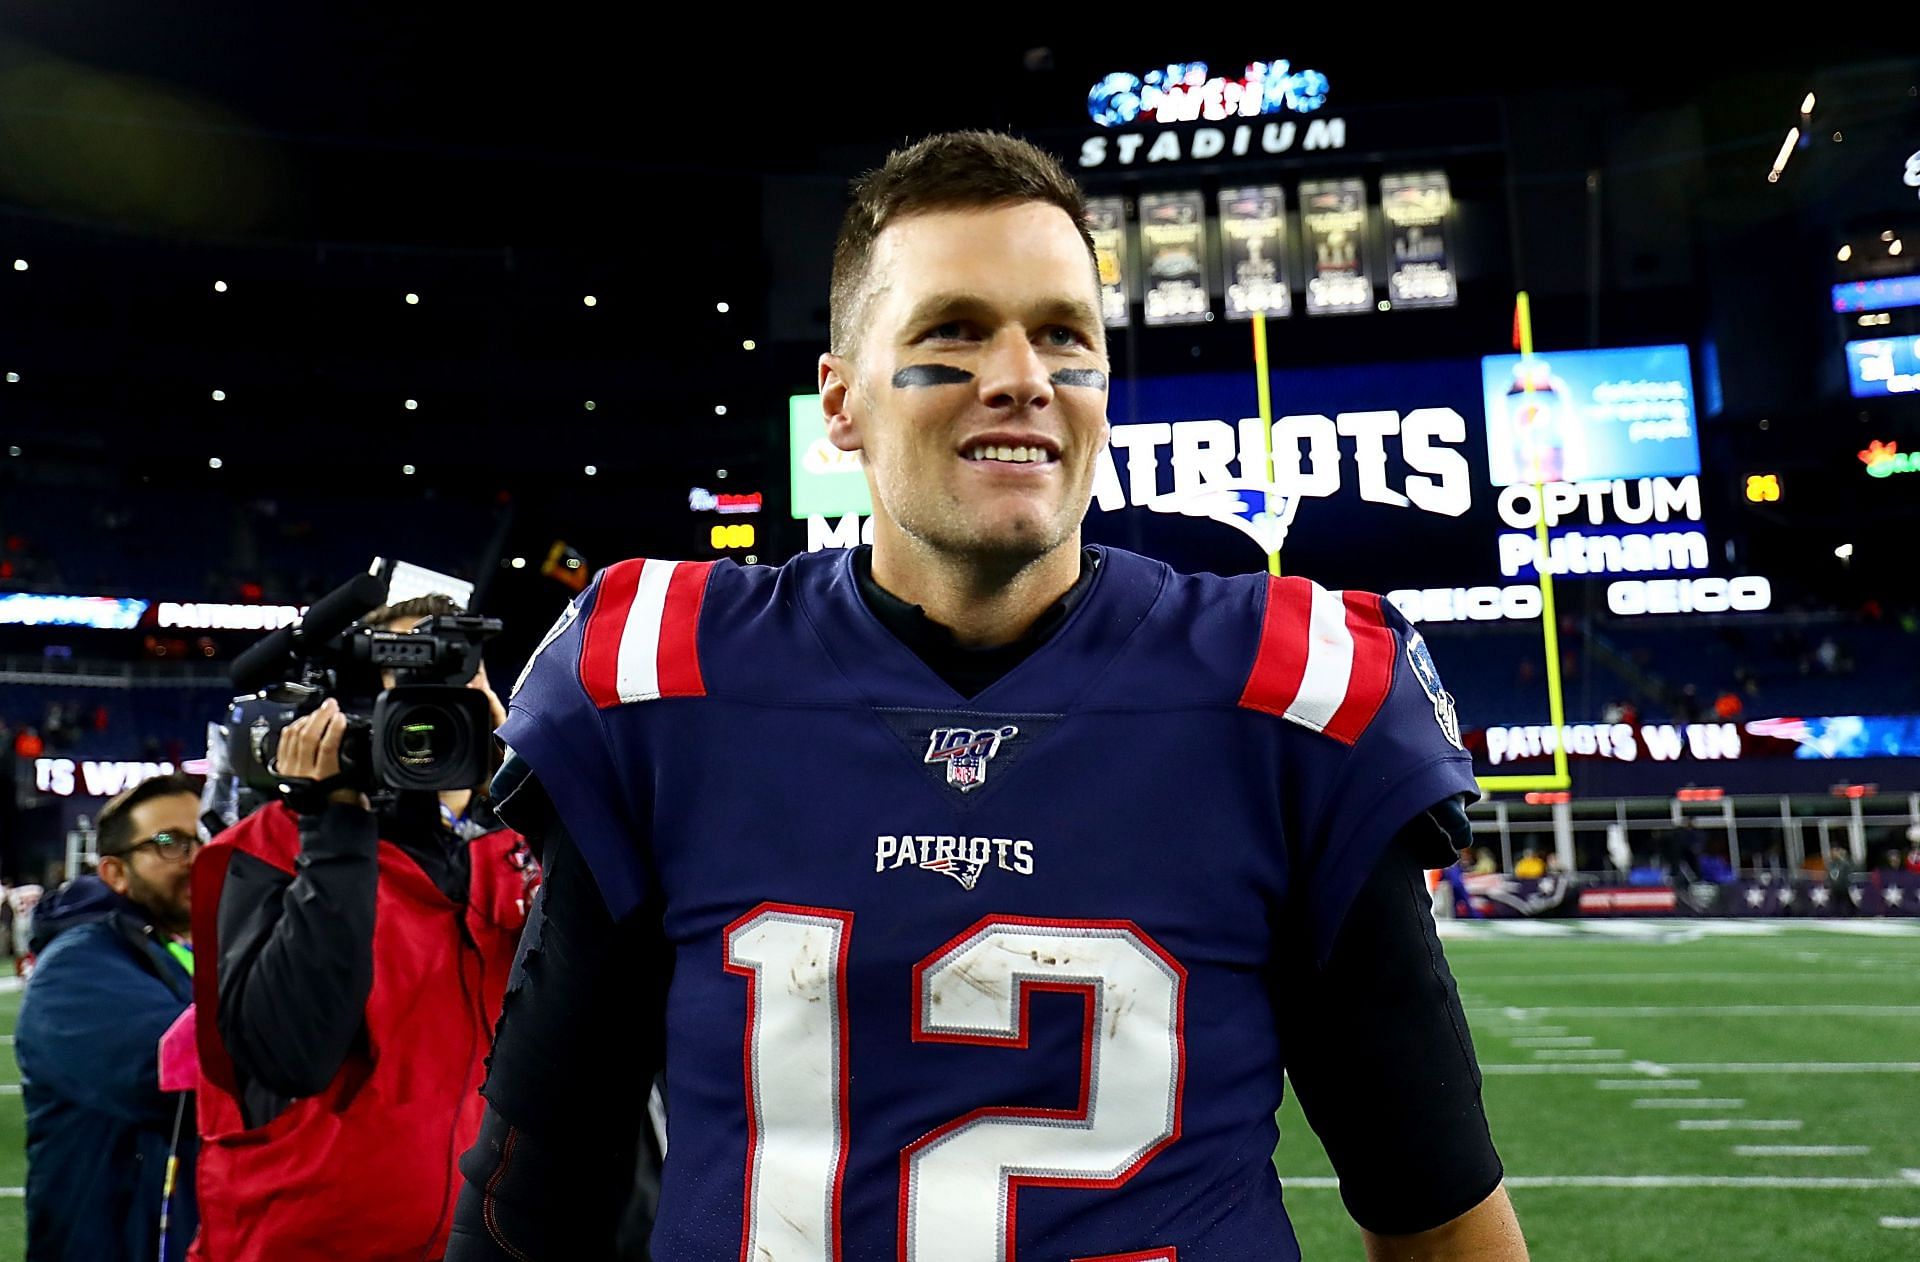 Tom Brady achieved barely believable success with the Patriots